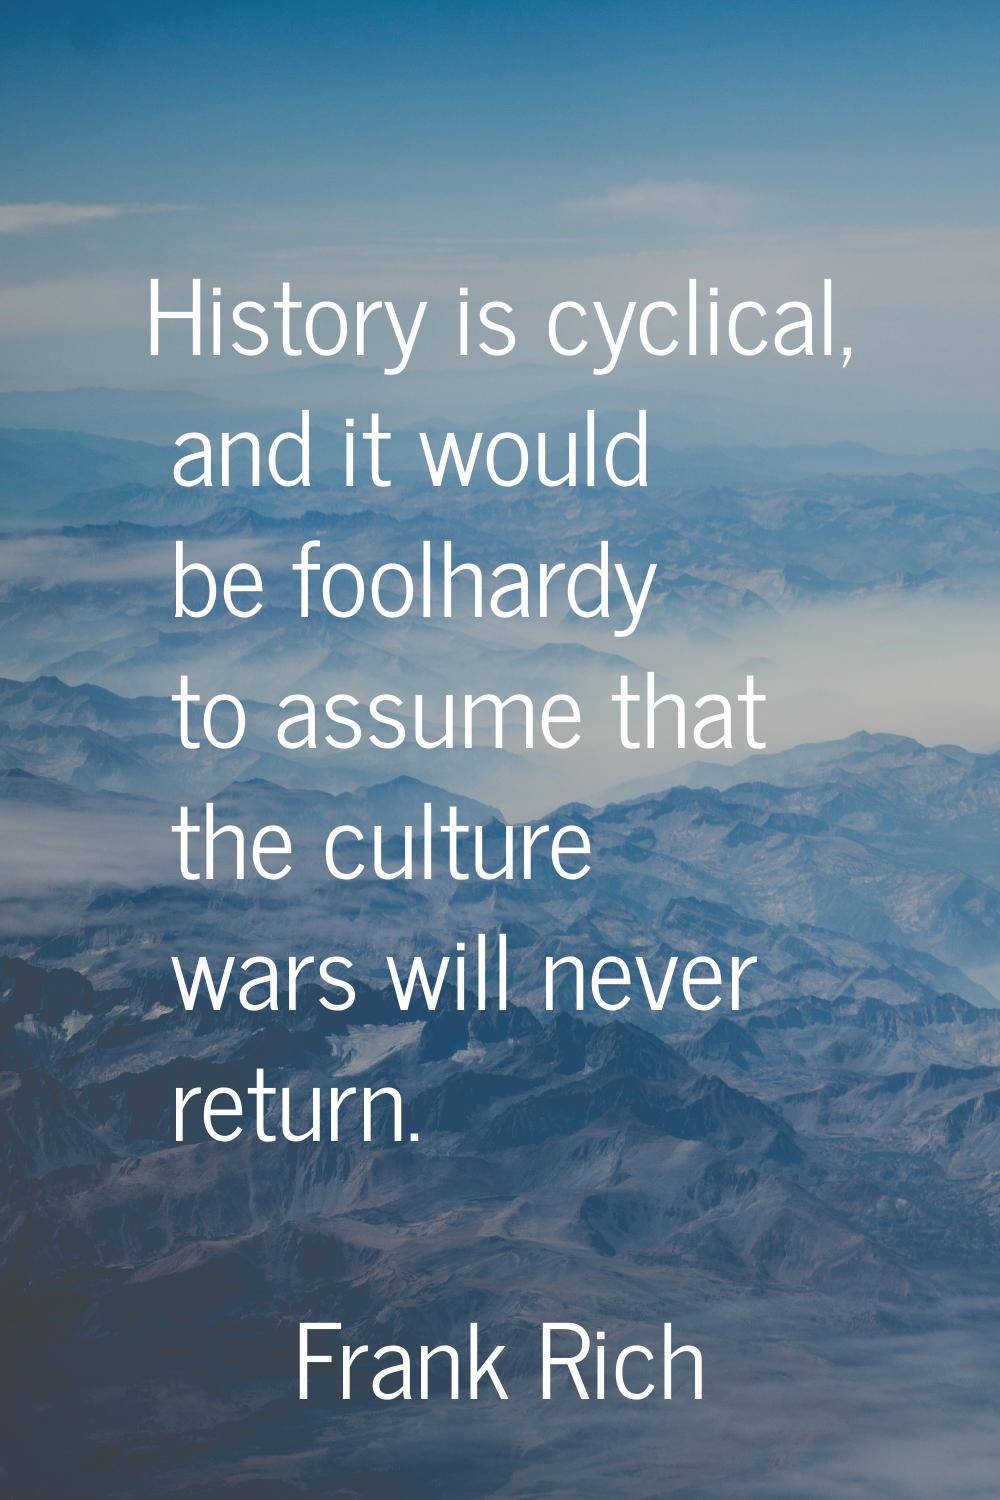 History is cyclical, and it would be foolhardy to assume that the culture wars will never return.